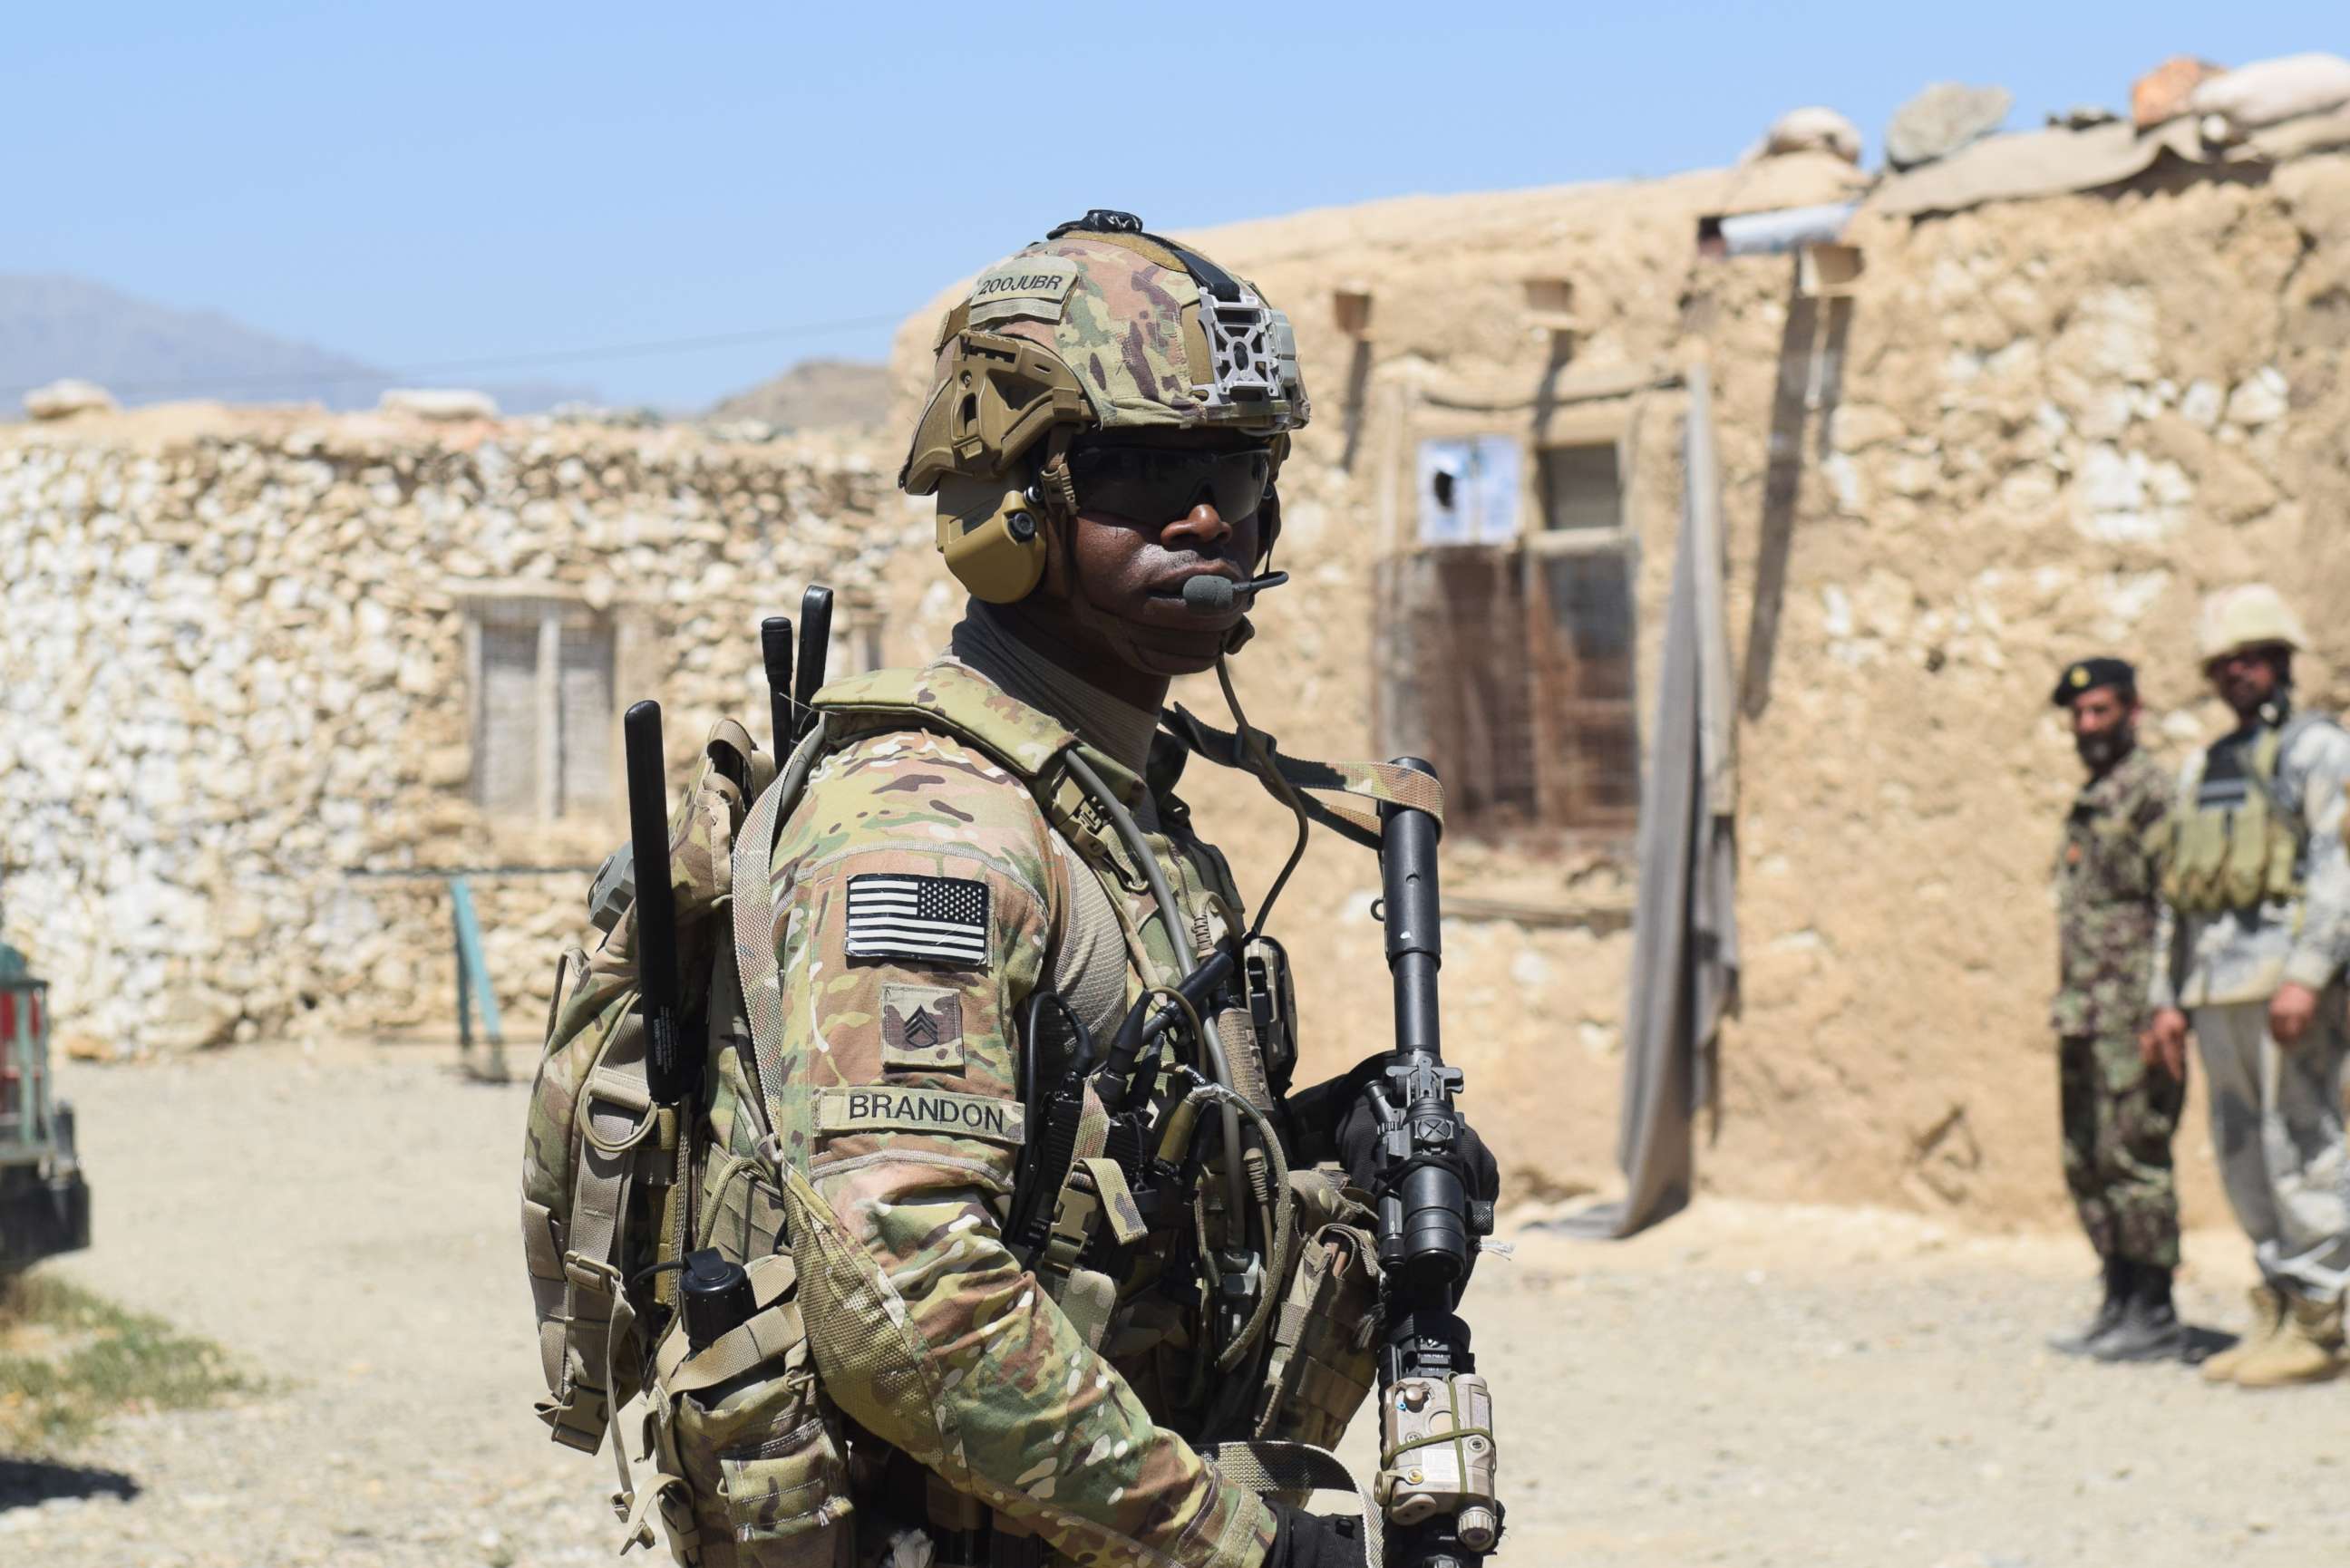 PHOTO: Advisors from the 2nd Security Force Assistance Brigade conducting advising during their deployment to Afghanistan, June 13, 2019.